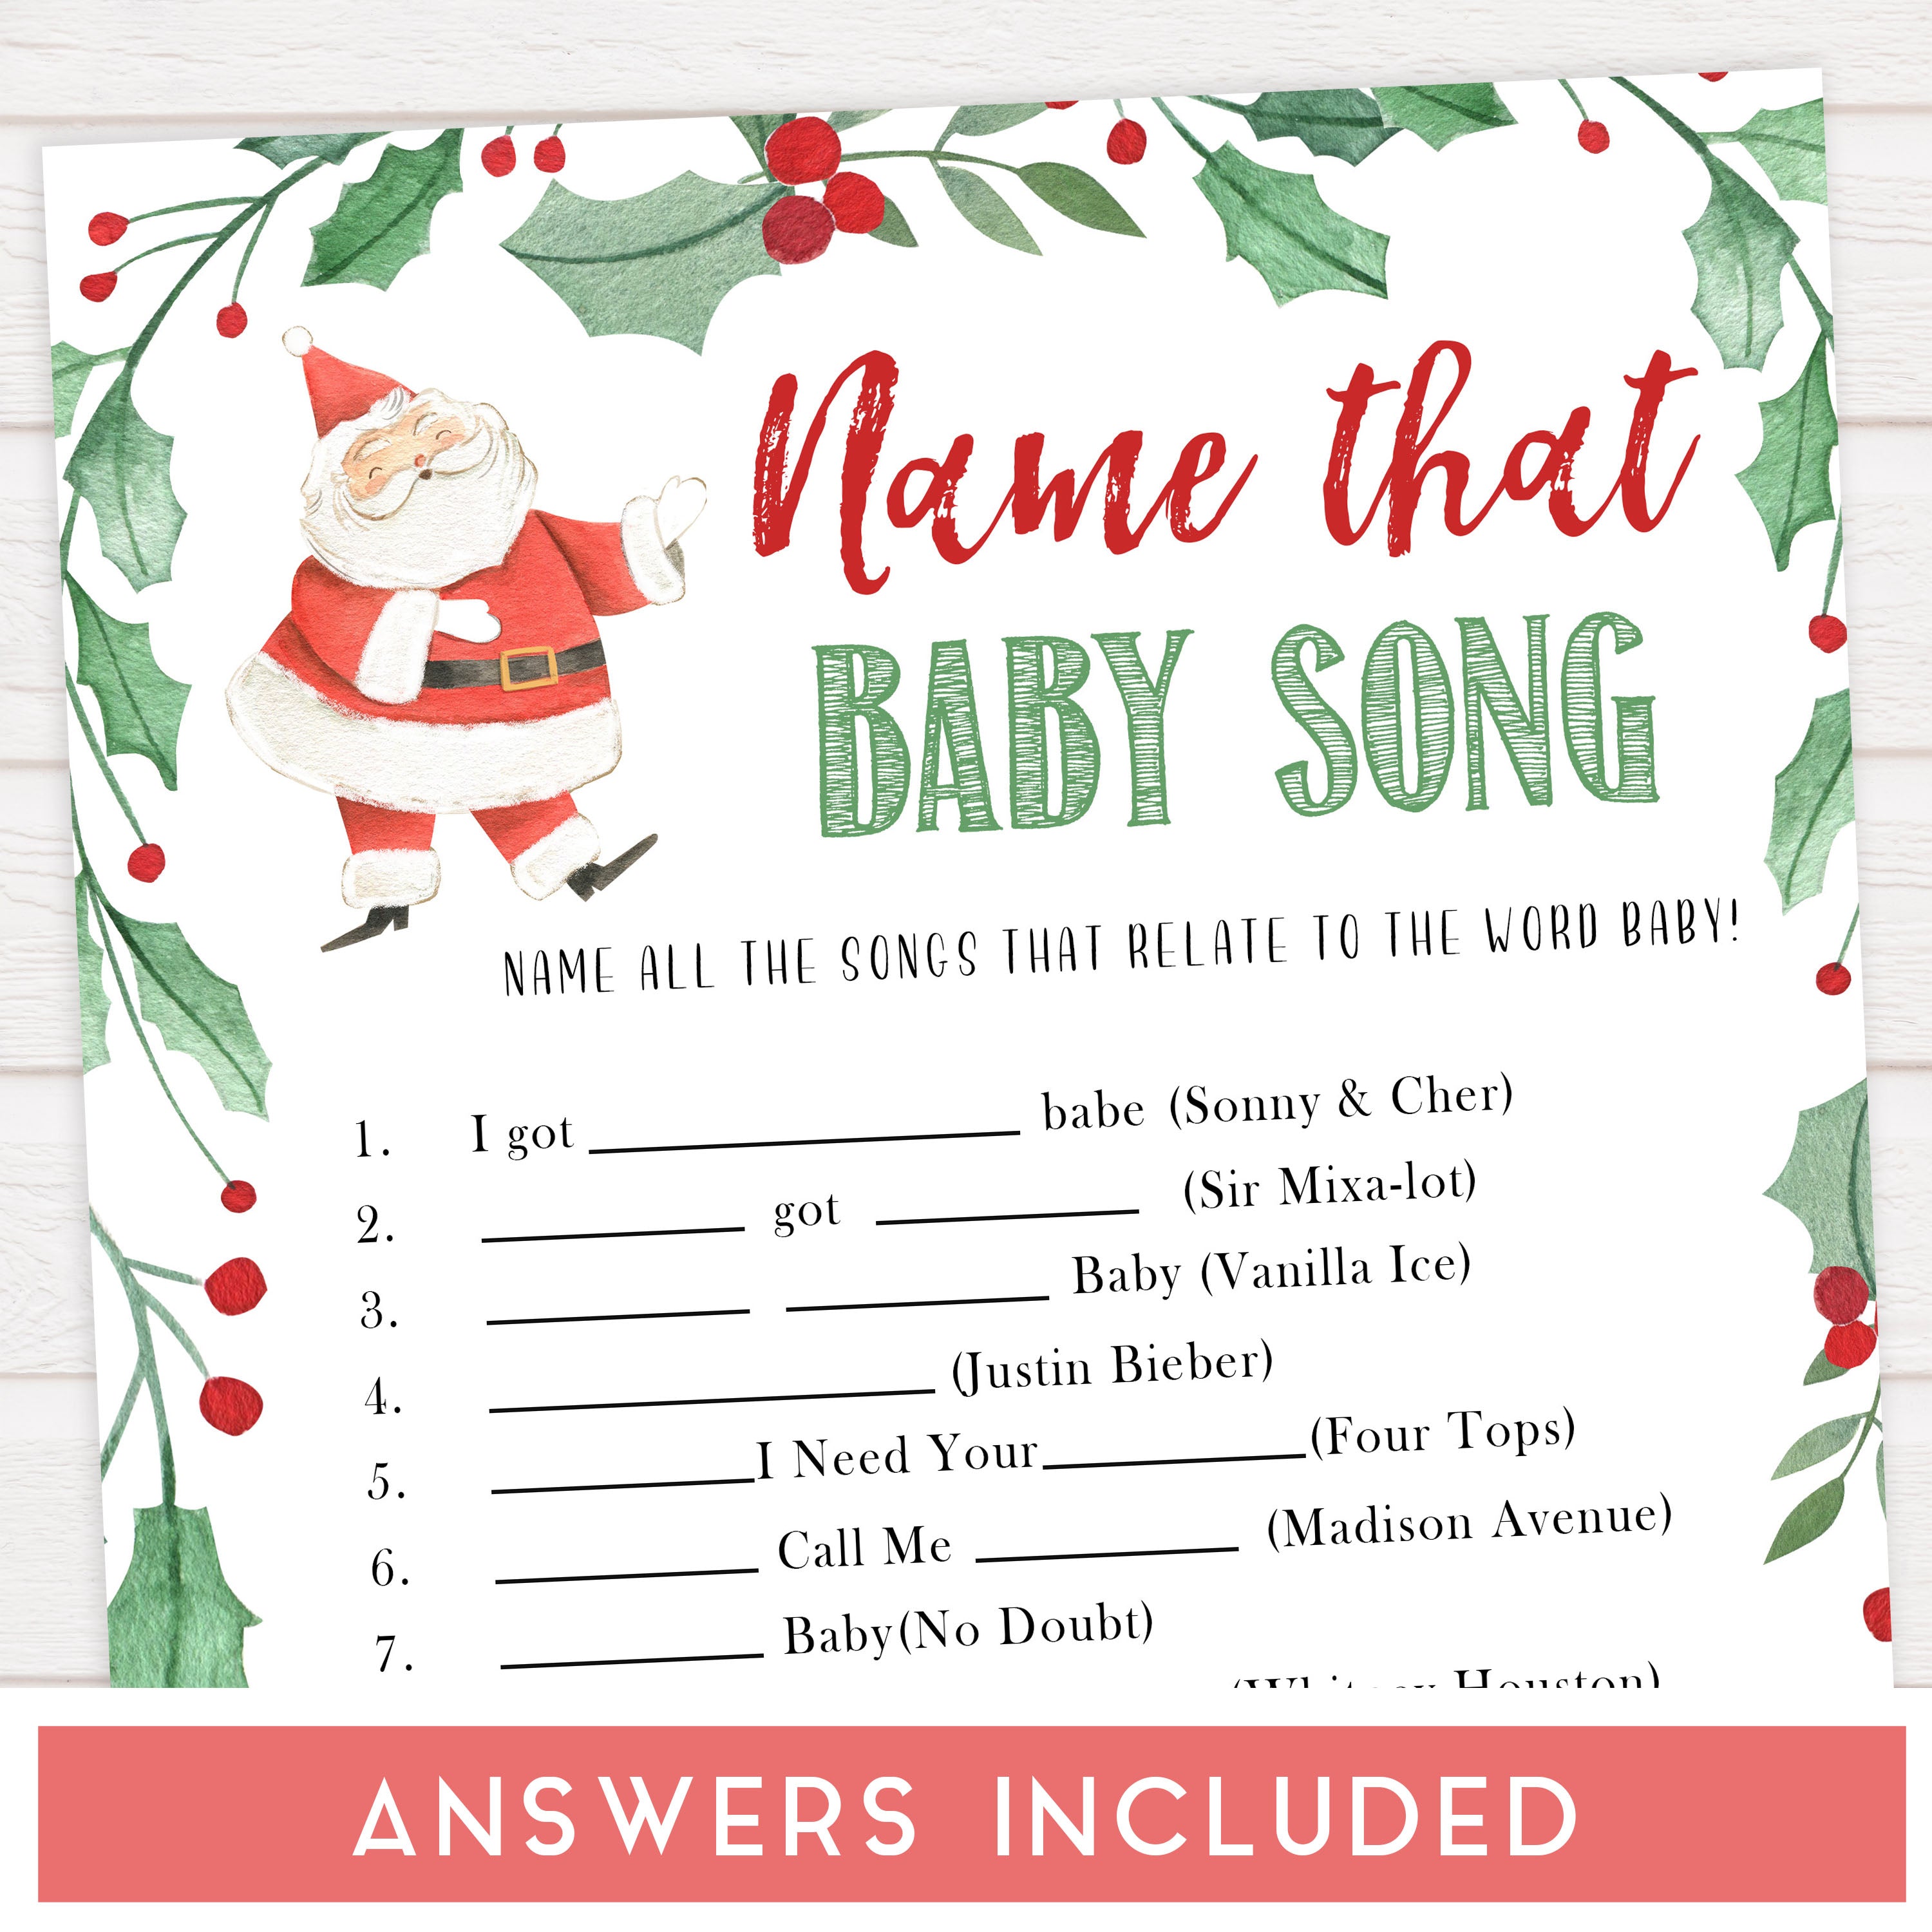 Christmas baby shower games, name that baby song, festive baby shower games, best baby shower games, top 10 baby games, baby shower ideas, baby shower games